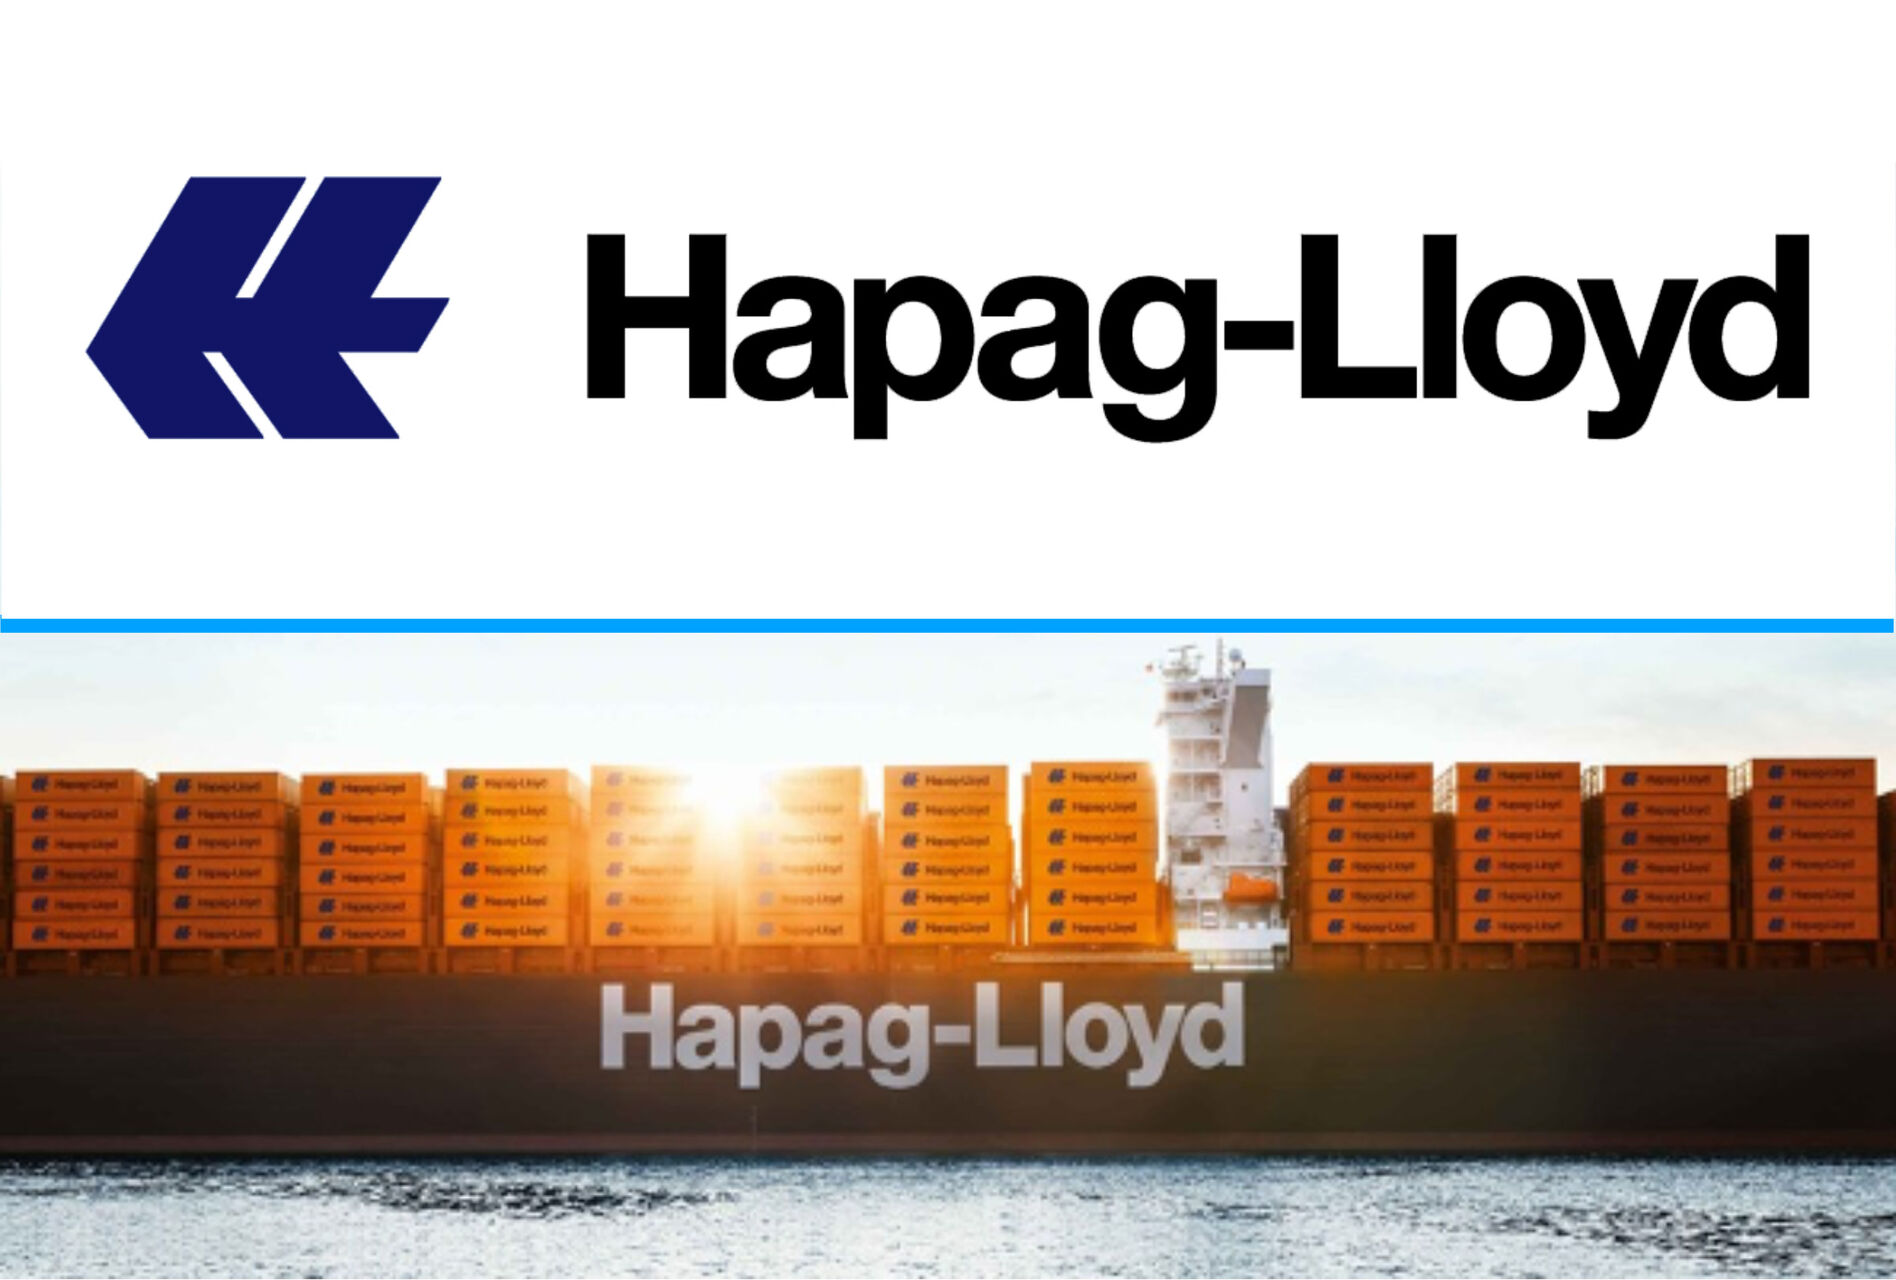 Image of the Hapag-Lloyd corporate logo.  Provides access to an IJI case study explaining how Hapag-Lloyd Used Essence To Drive an Agile Transformation.